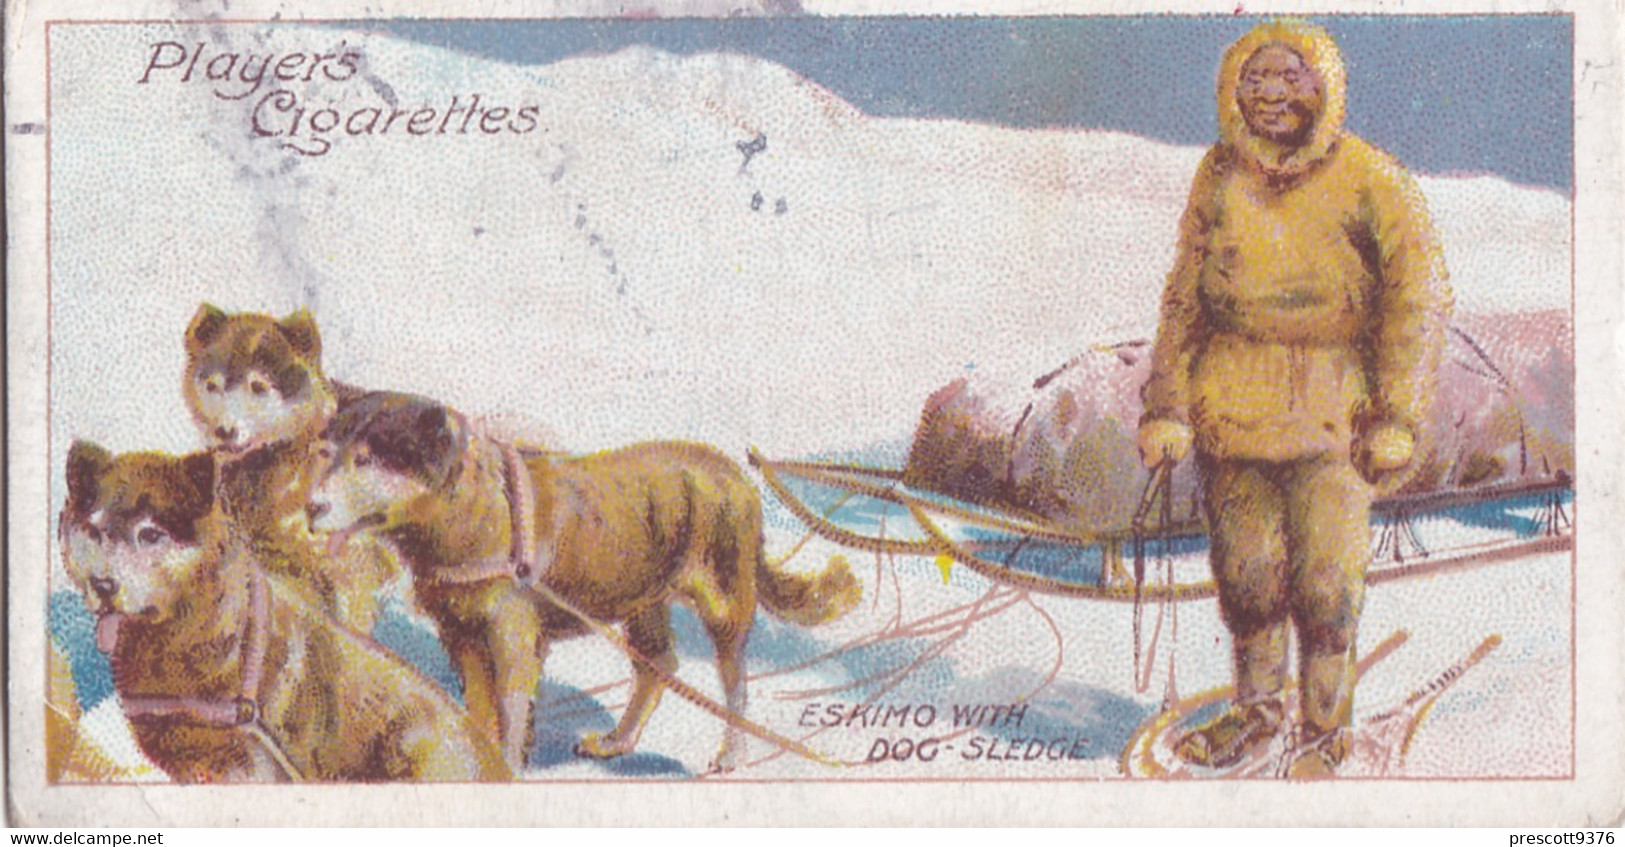 6 Eskimo With Dog Sled -  Polar Exploration 1915 - Players Cigarette Card - Arctic - Antique - Wills